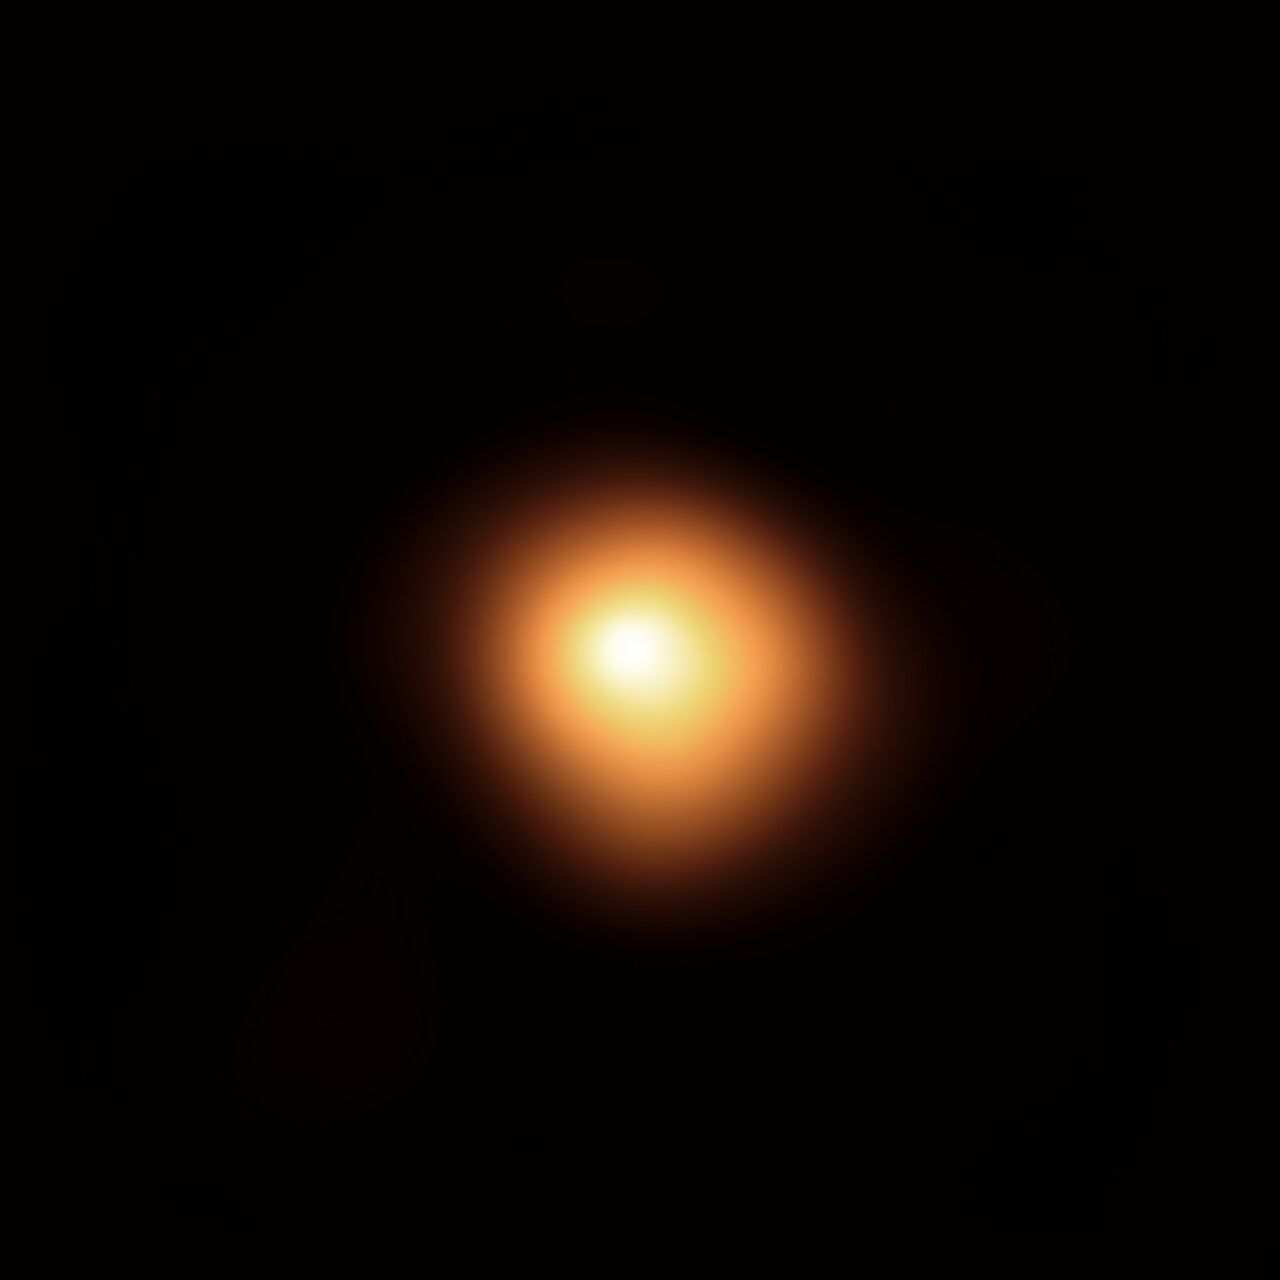 The red supergiant star Betelgeuse, in the constellation of Orion, has been undergoing unprecedented dimming. This image was taken in January using the European Southern Observatory's Very Large Telescope.